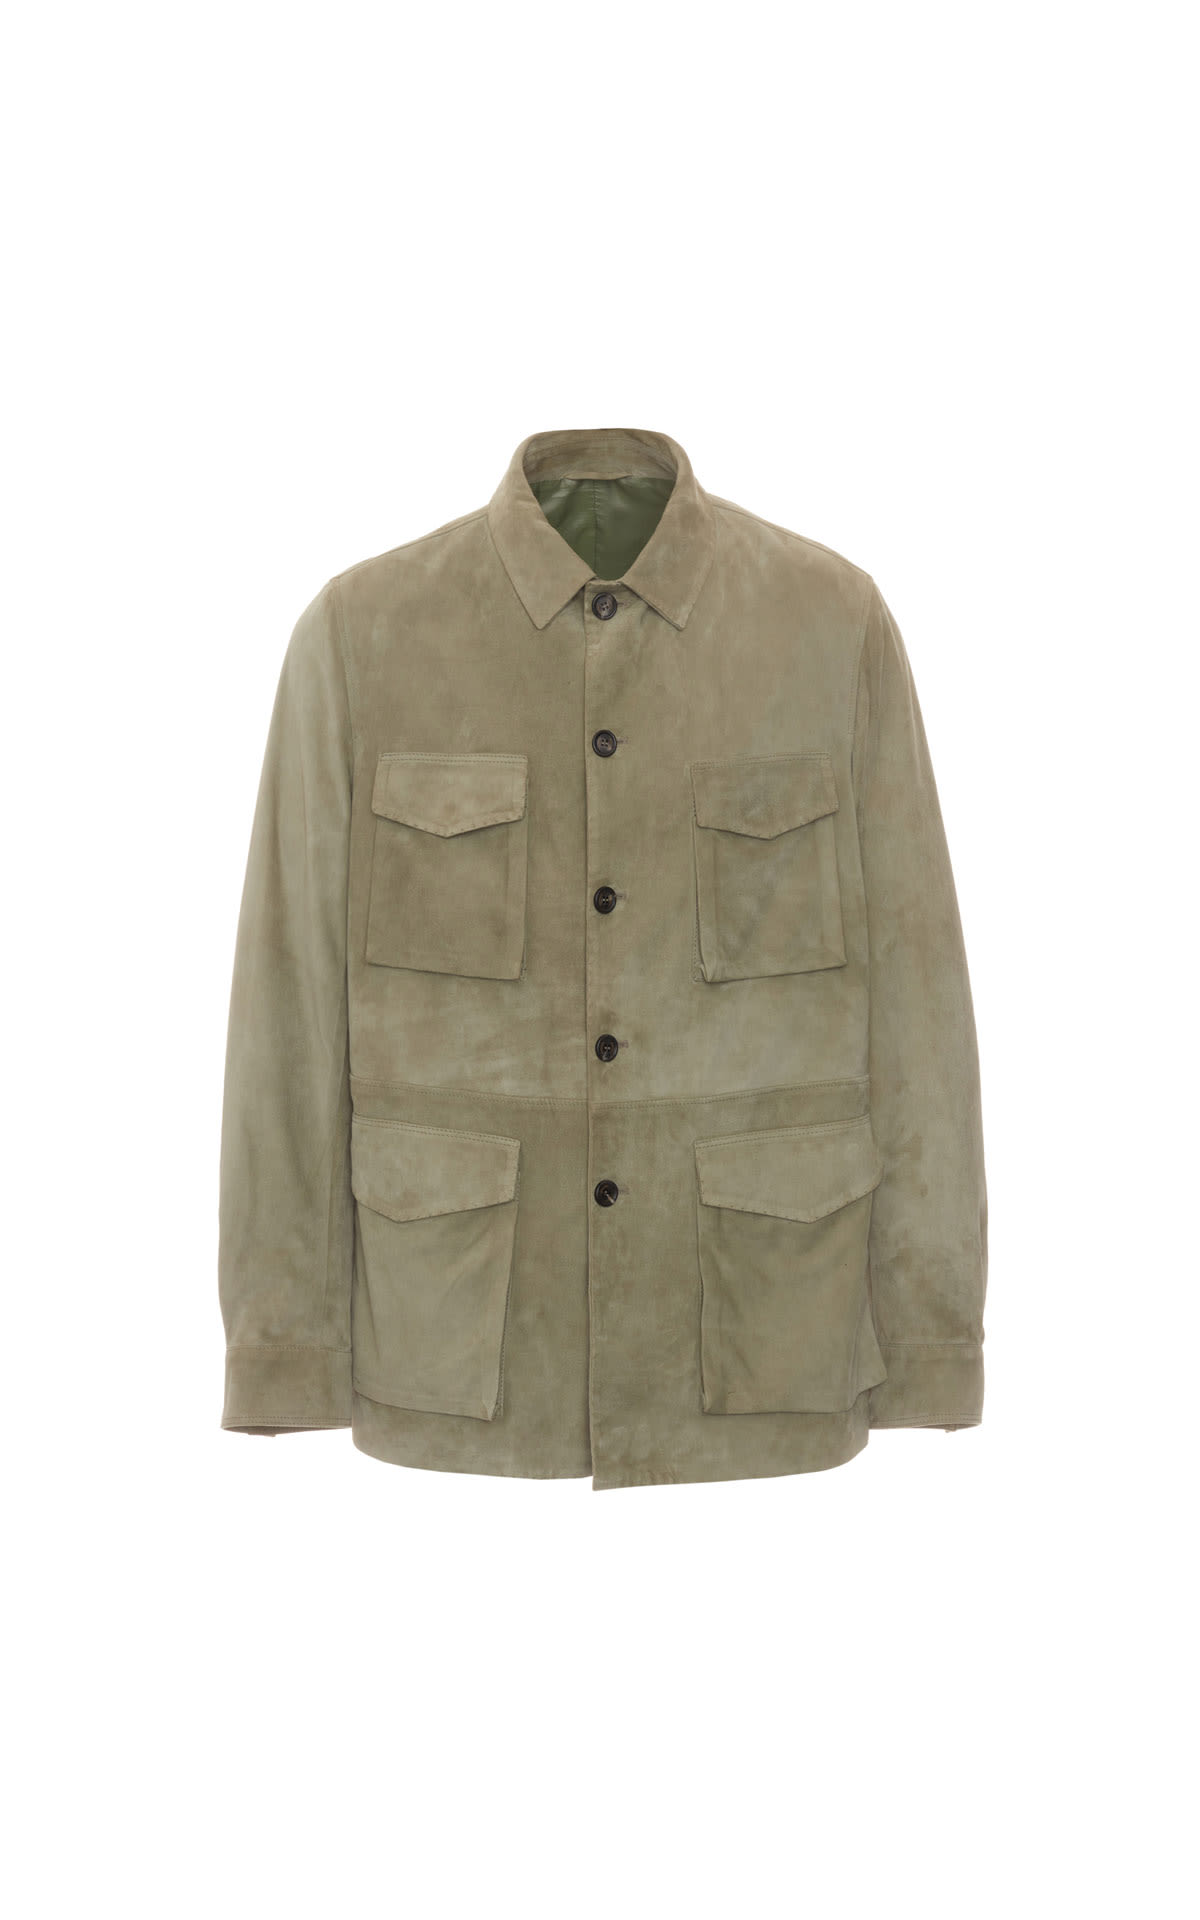 Eleventy Military green suede jacket from Bicester Village